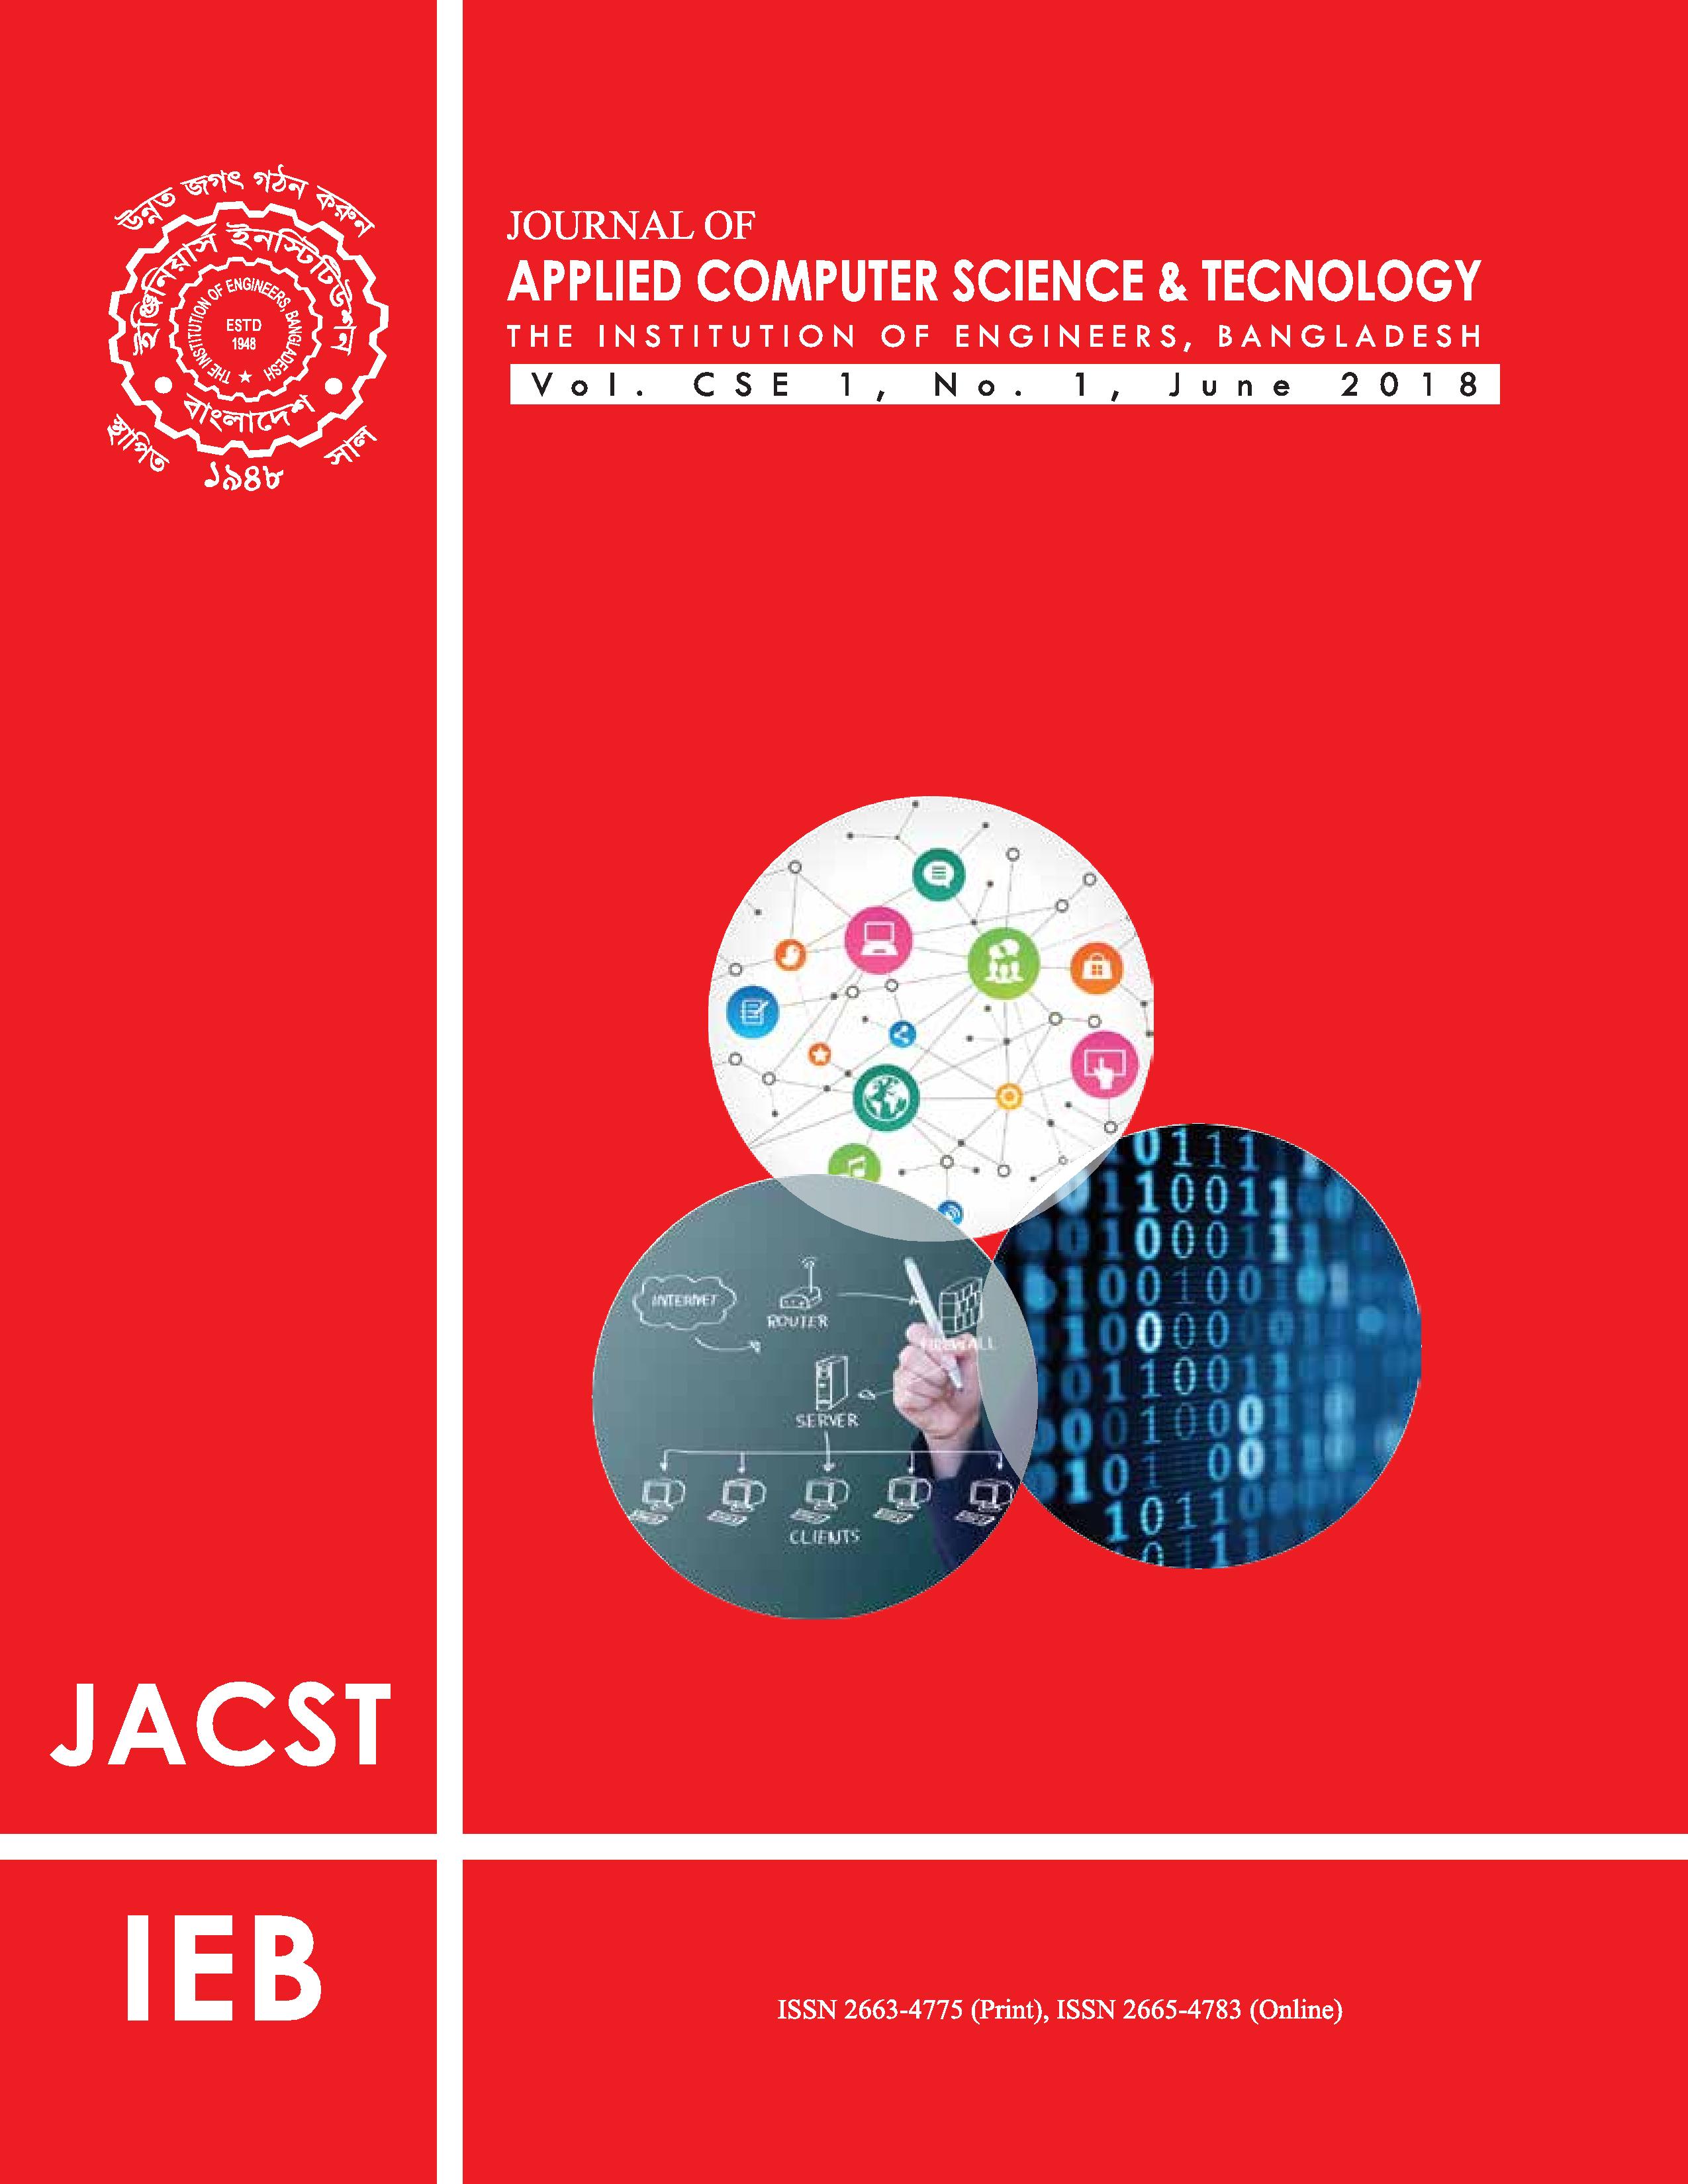 Journal of Applied Computer Science & Technology Vol 1, CSE 1, No. 1, June 2018